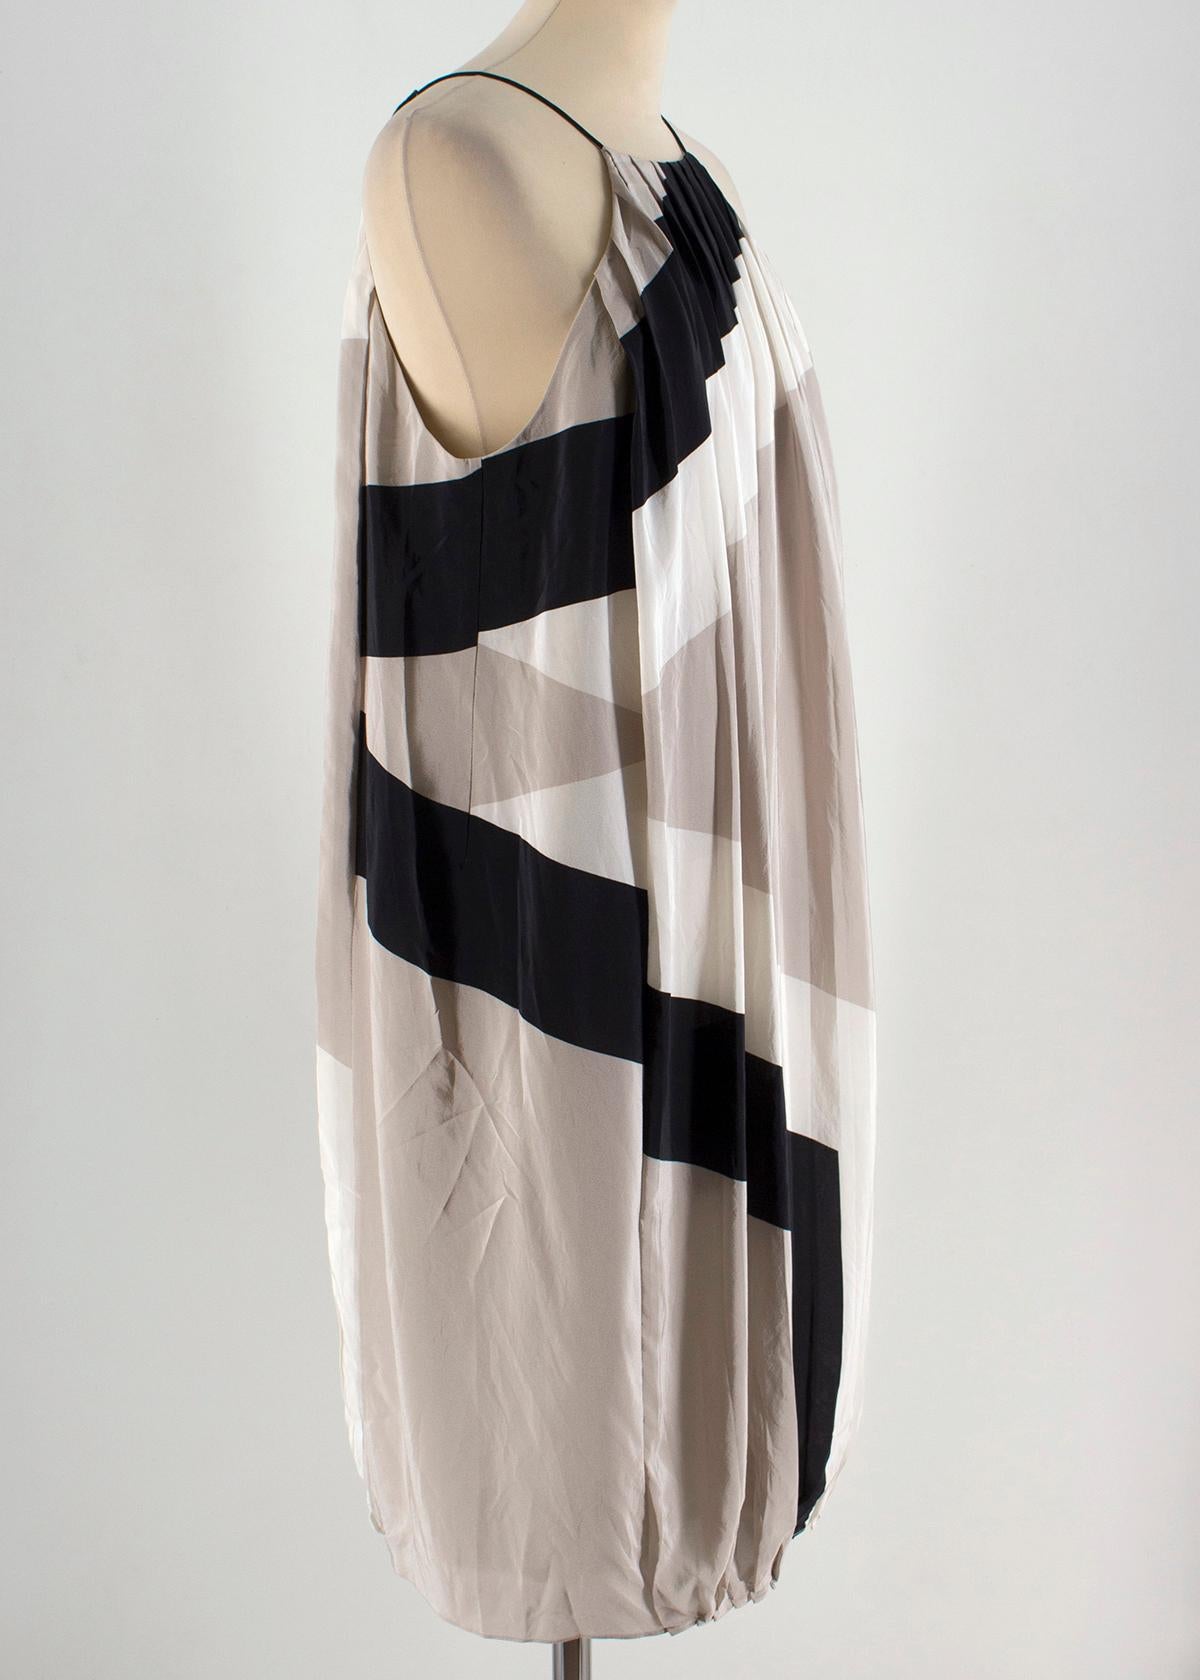 Tibi Pleated Colour-Block Silk-Chiffon Dress

- Tibi silk nude, grey and black shift dress. 
- Small V neck with lace tie-up.
- Pleated design with an asymmetrical stripe across the body.
- Gathered hem creating a puffed look. 
- Silk